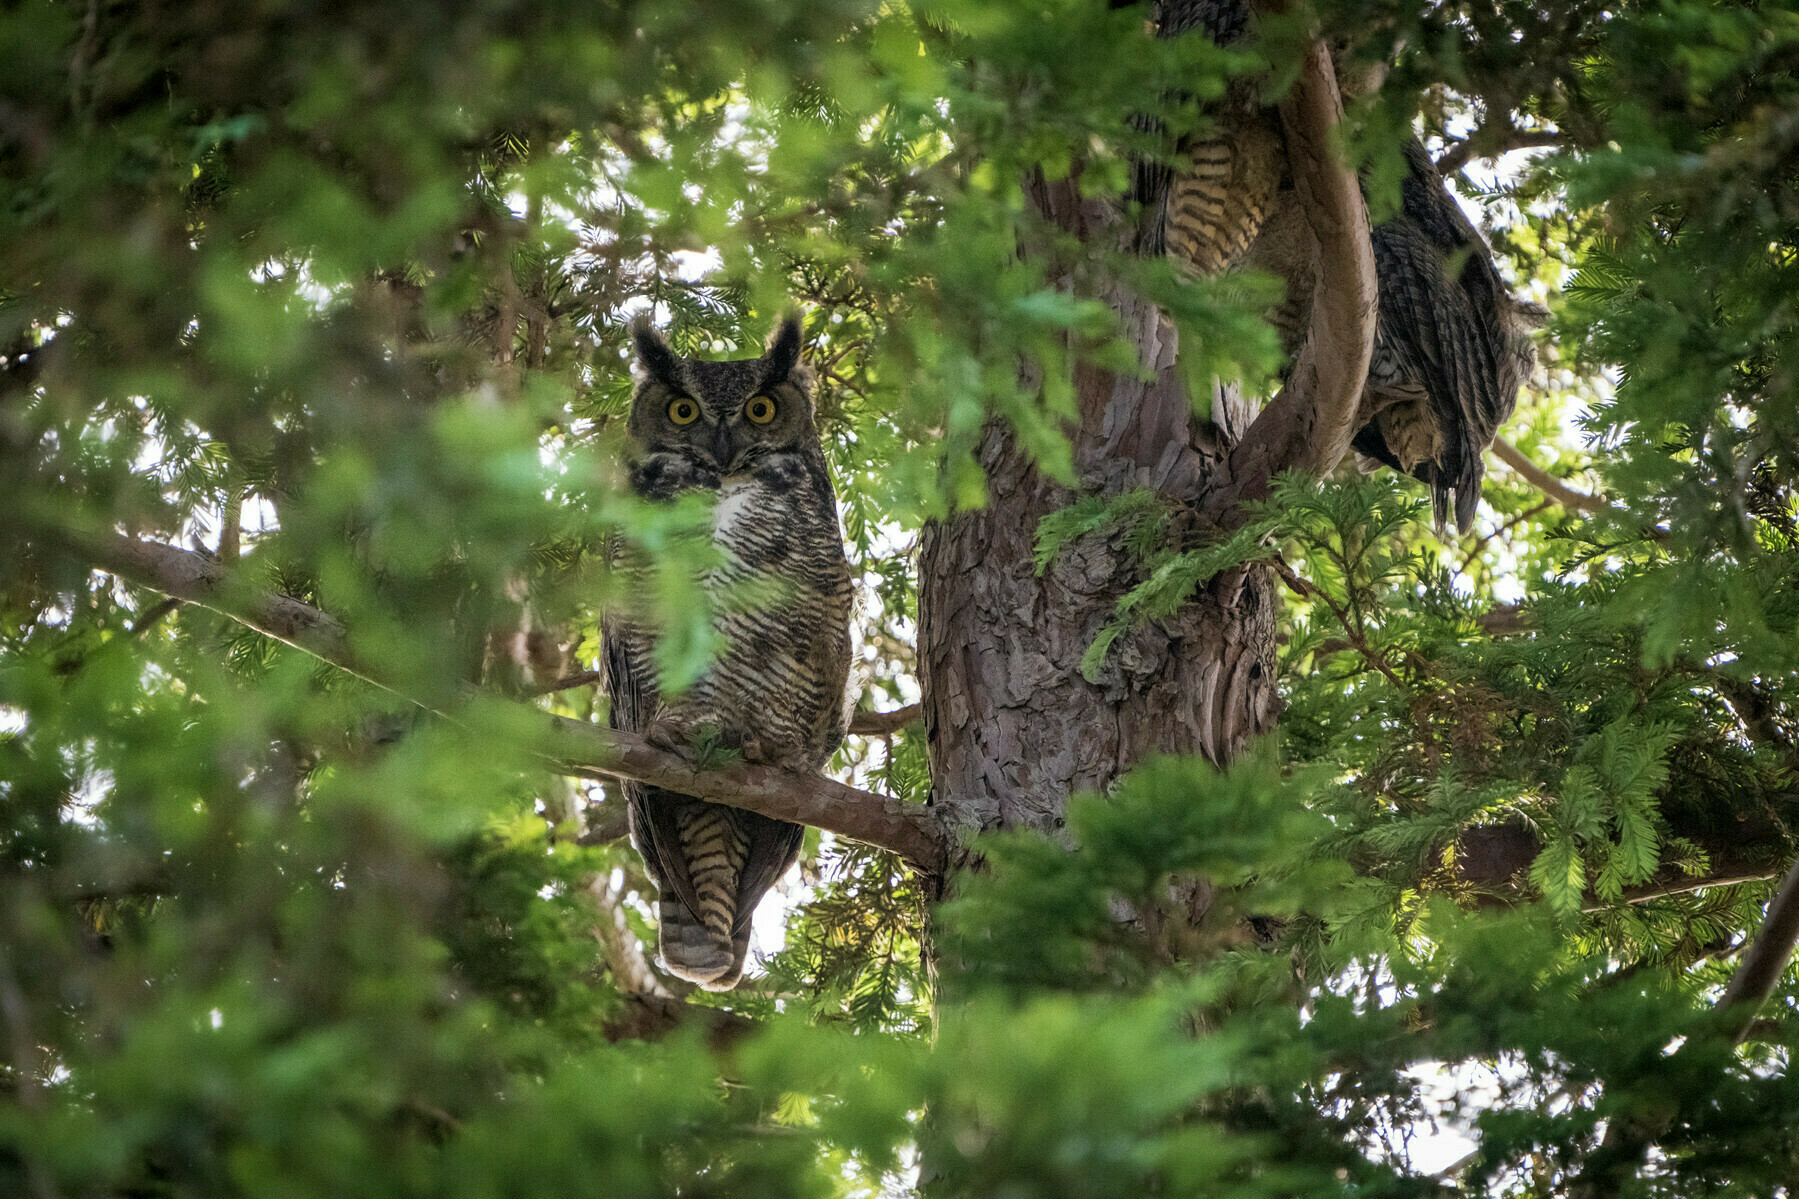 Great Horned Owl sitting on a redwood tree branch below two partially visible juvenile owls.